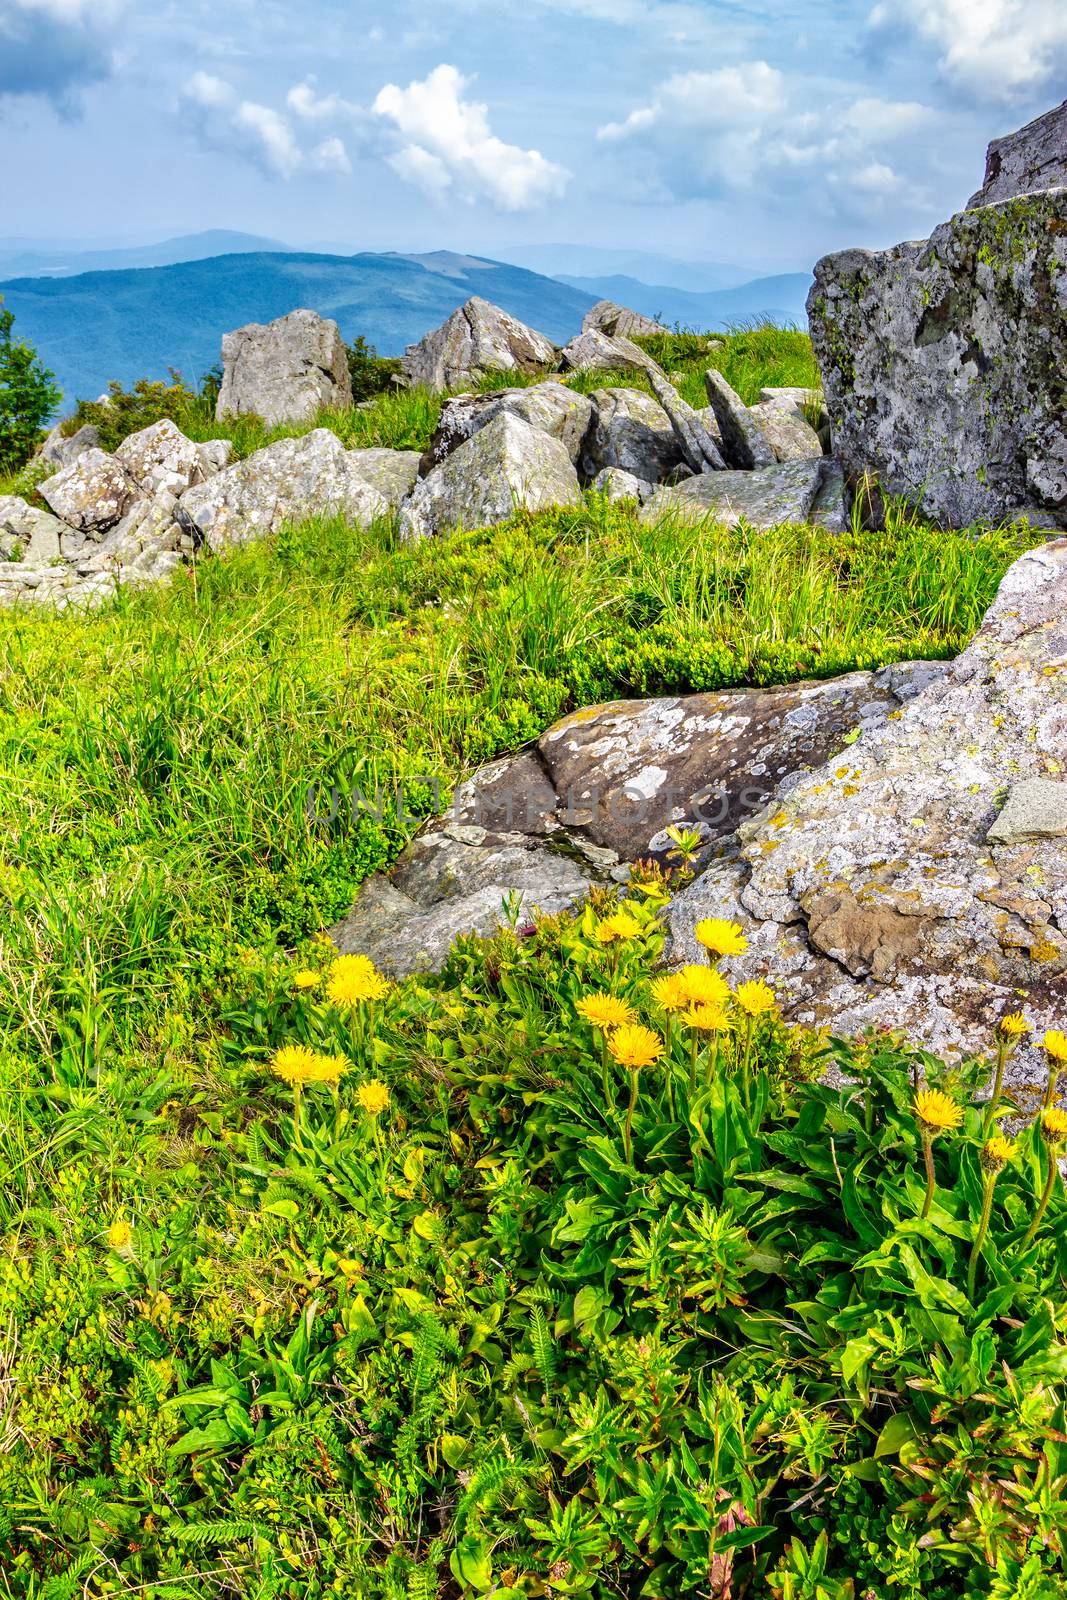 yellow dandelions in the grass among the huge rocks on hillside in high mountains